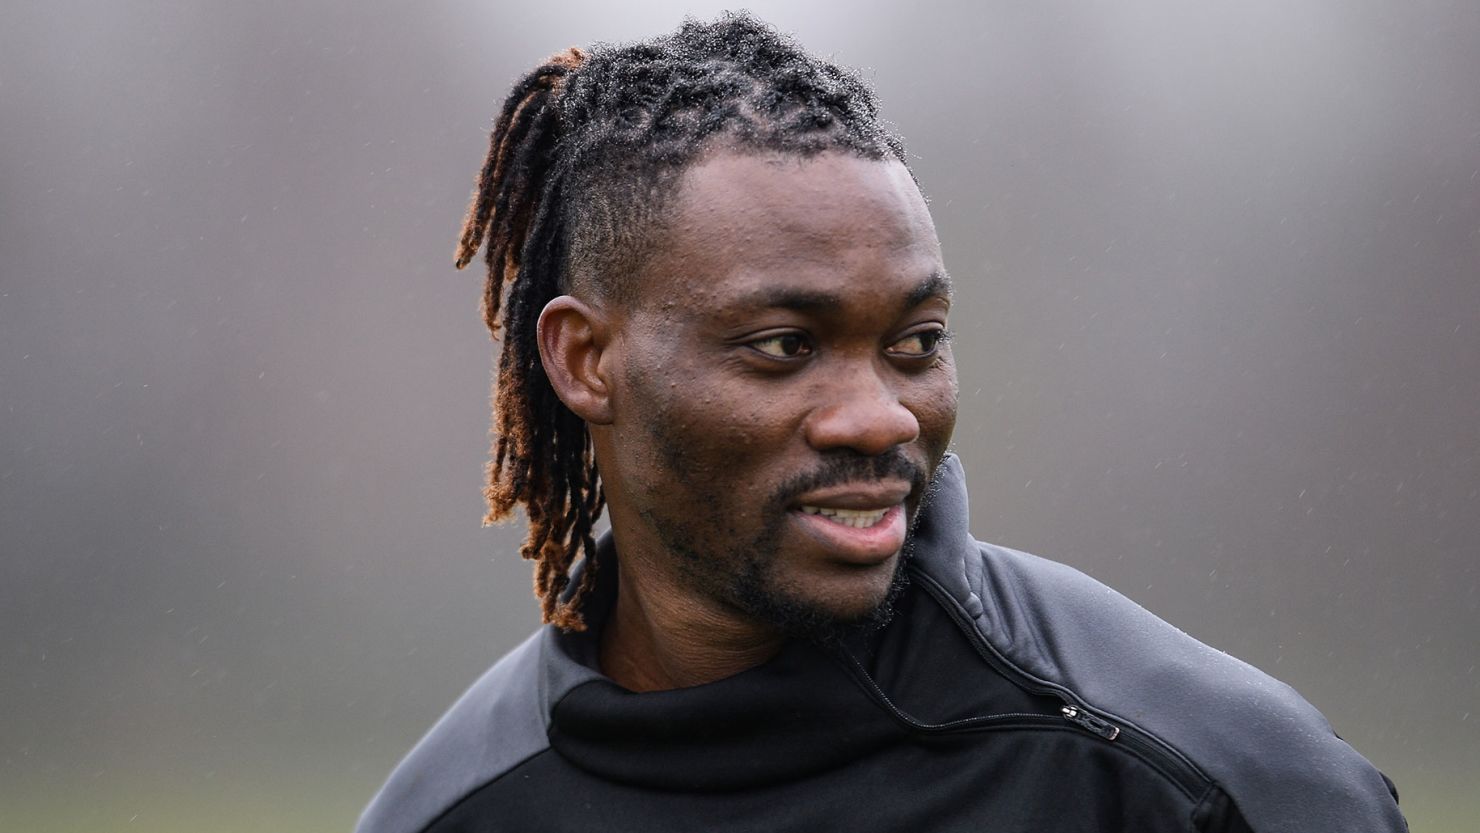 Atsu -- who has represented several different English clubs, including Chelsea, Everton, Bournemouth and Newcastle -- is still missing following the devastating earthquake.